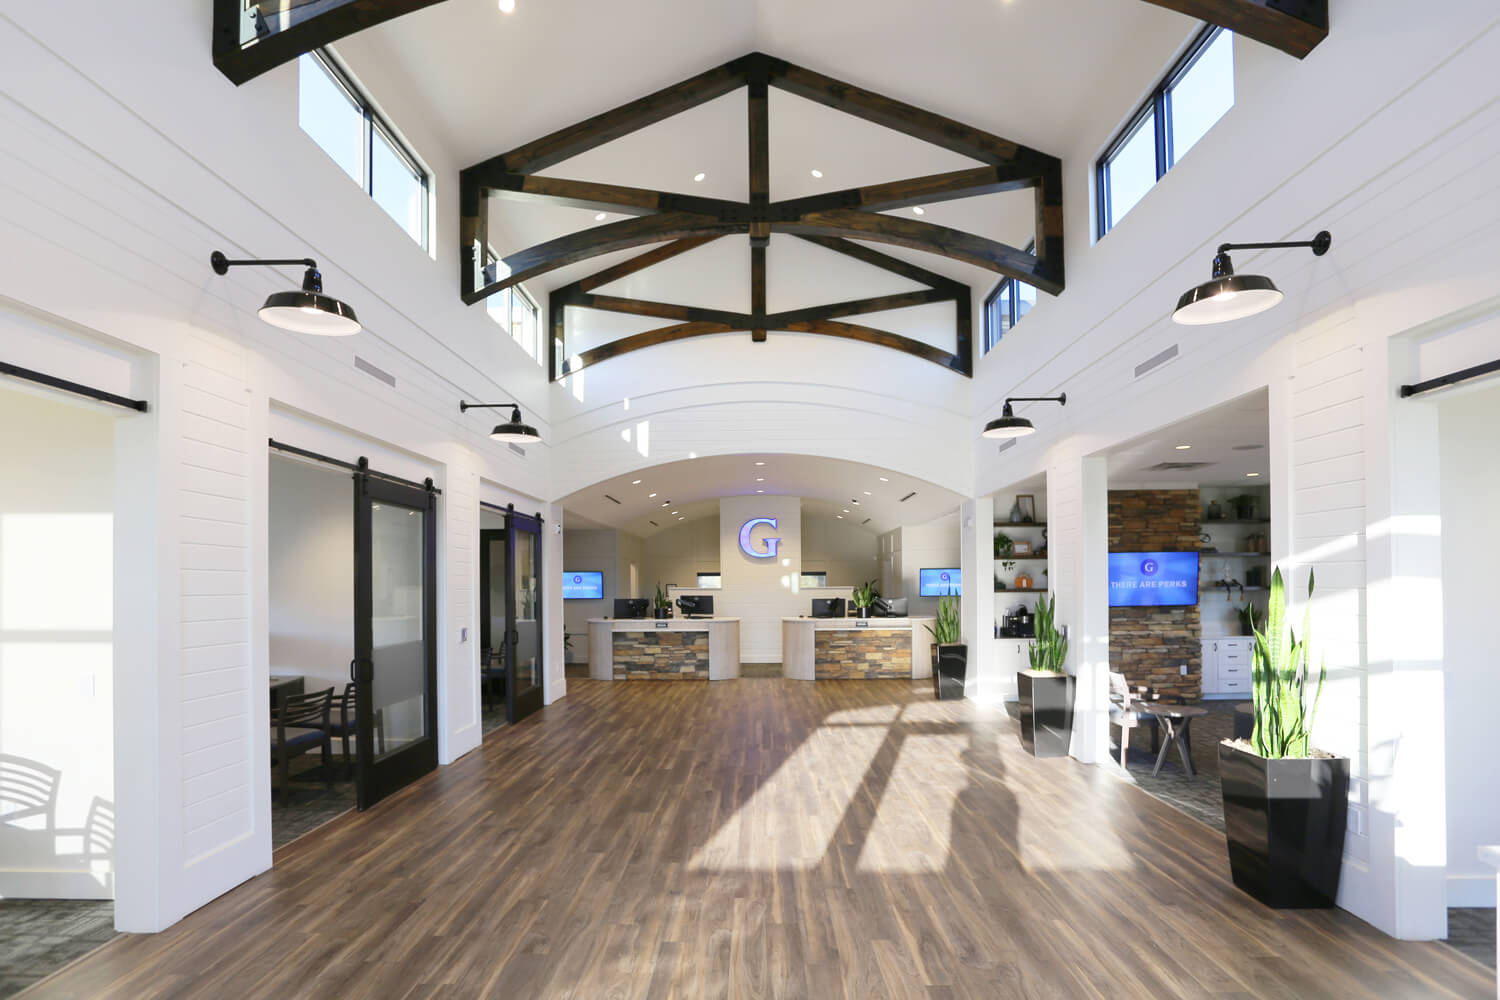 Guardian Credit Union - Wetumpka - Main Lobby with Trusses - Designed by Foshee Architecture